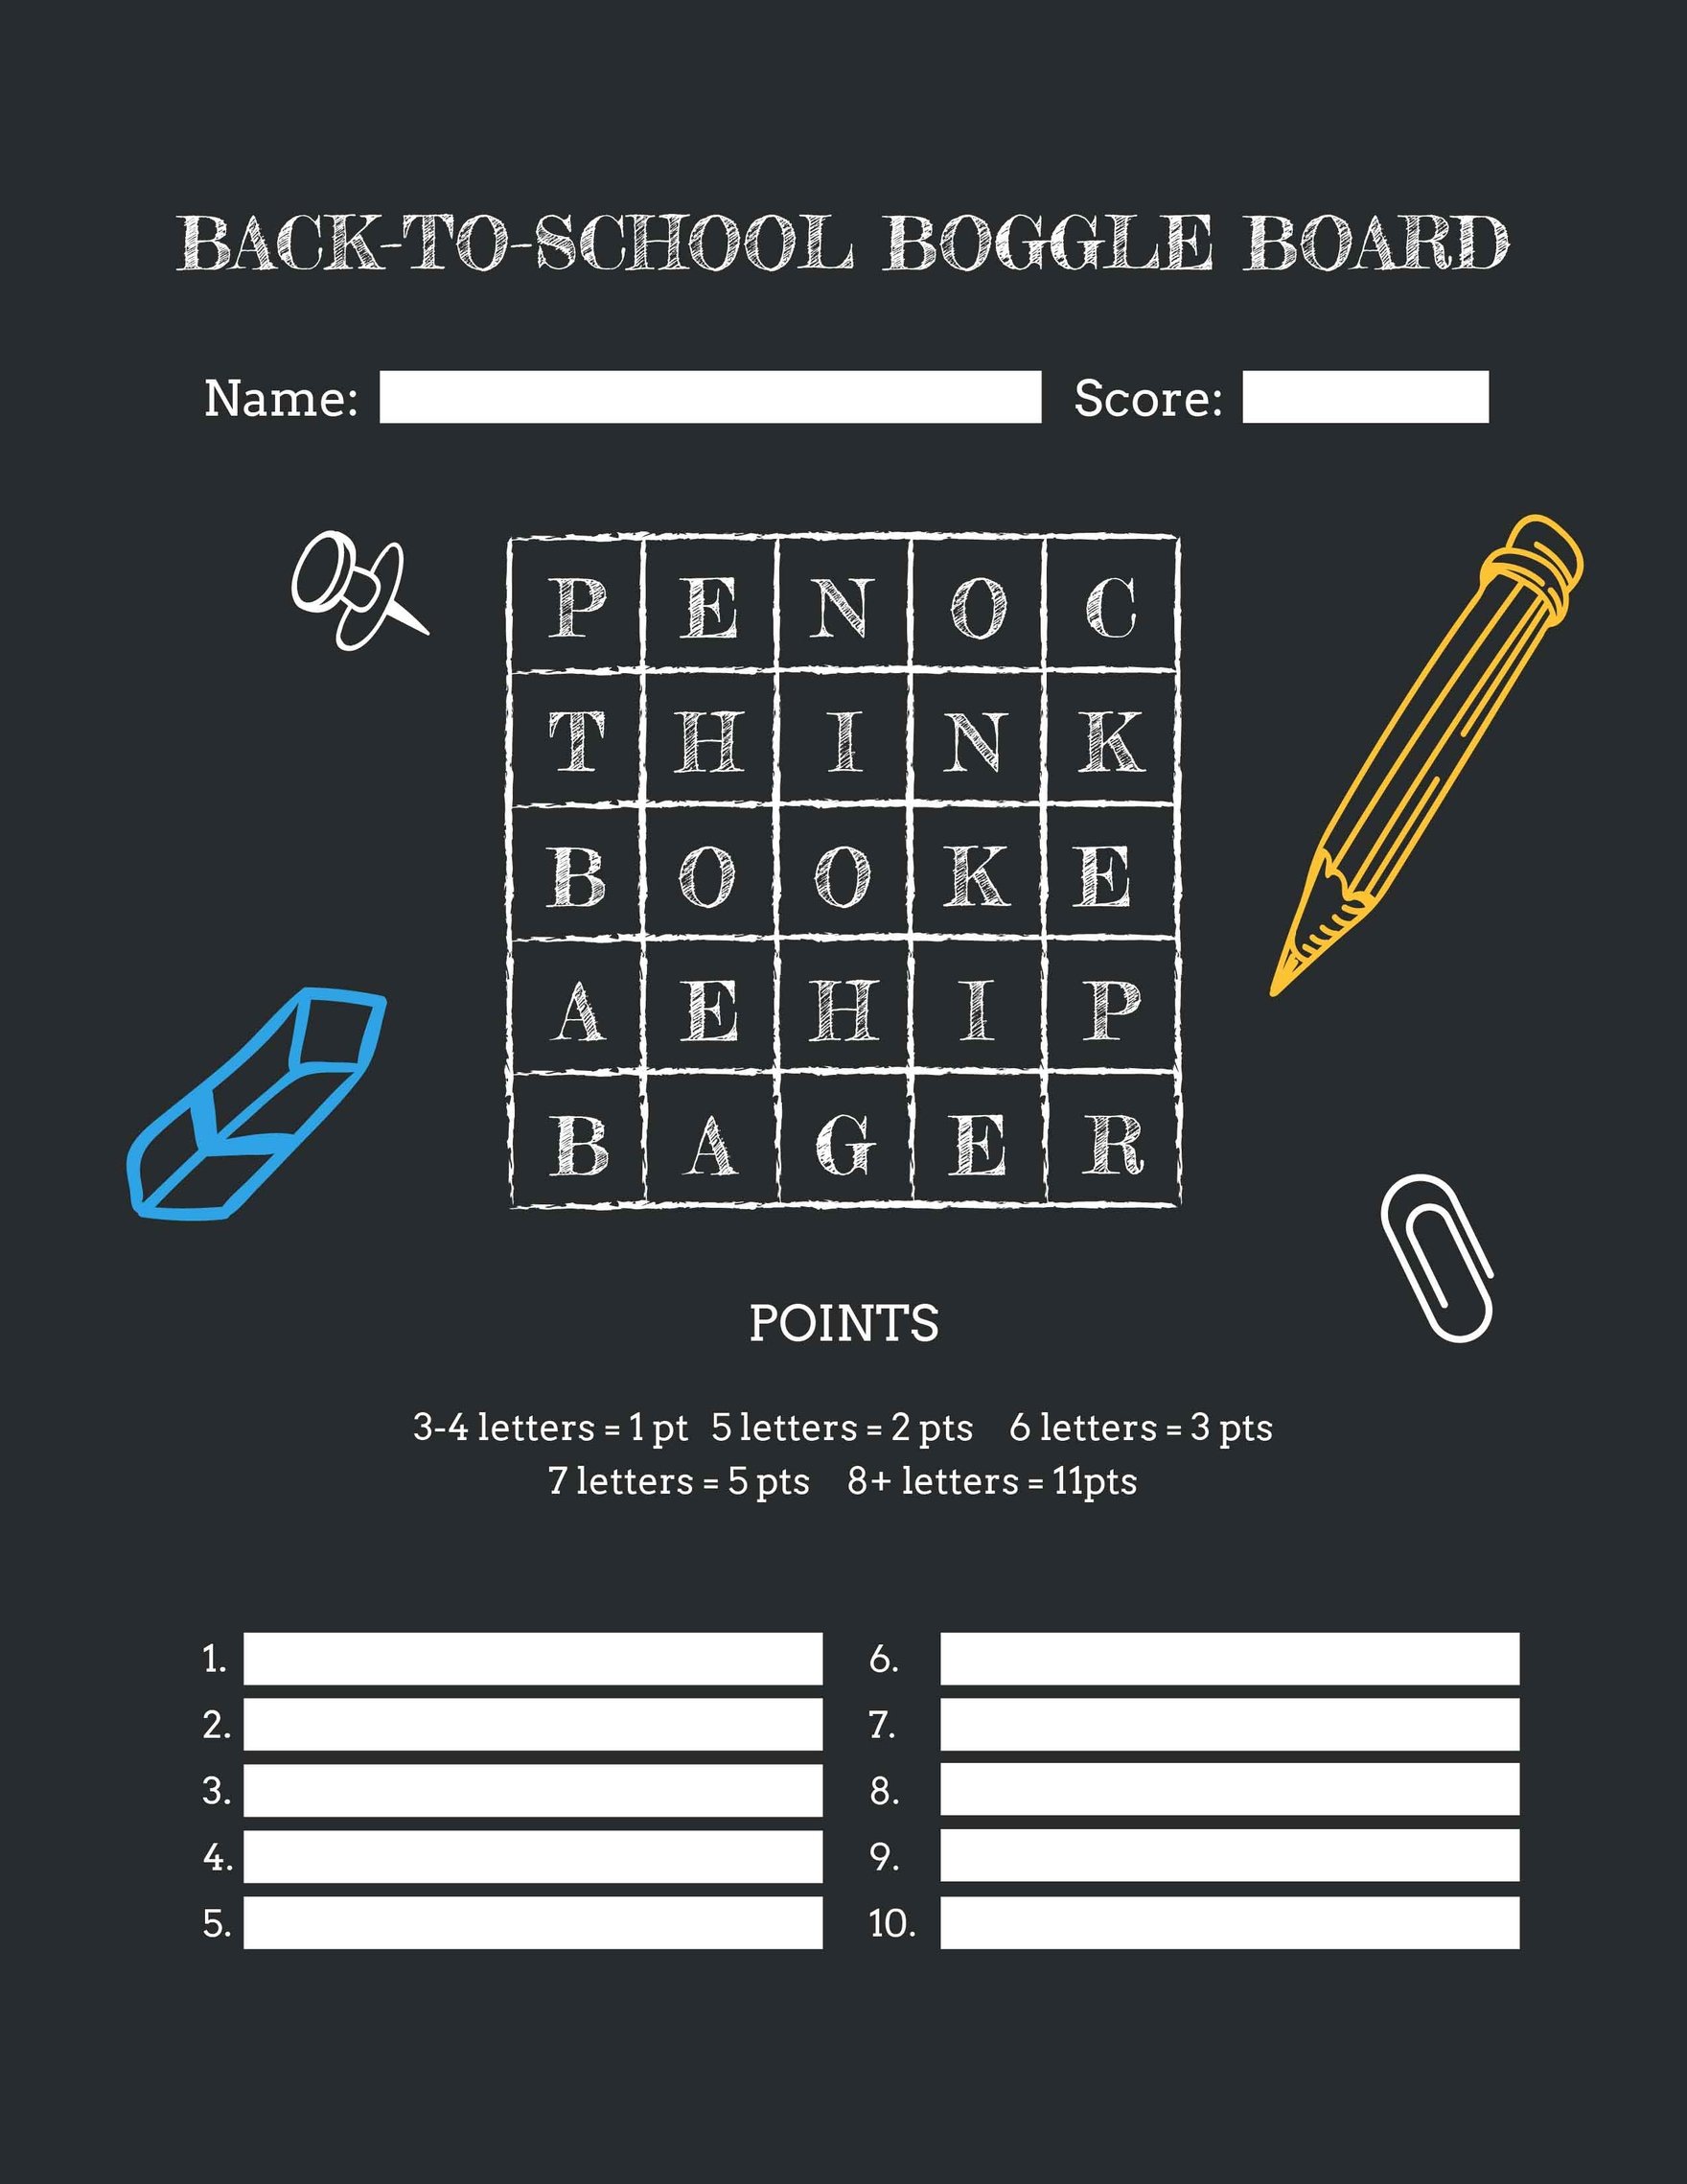 Back-to-School Boggle Board Template